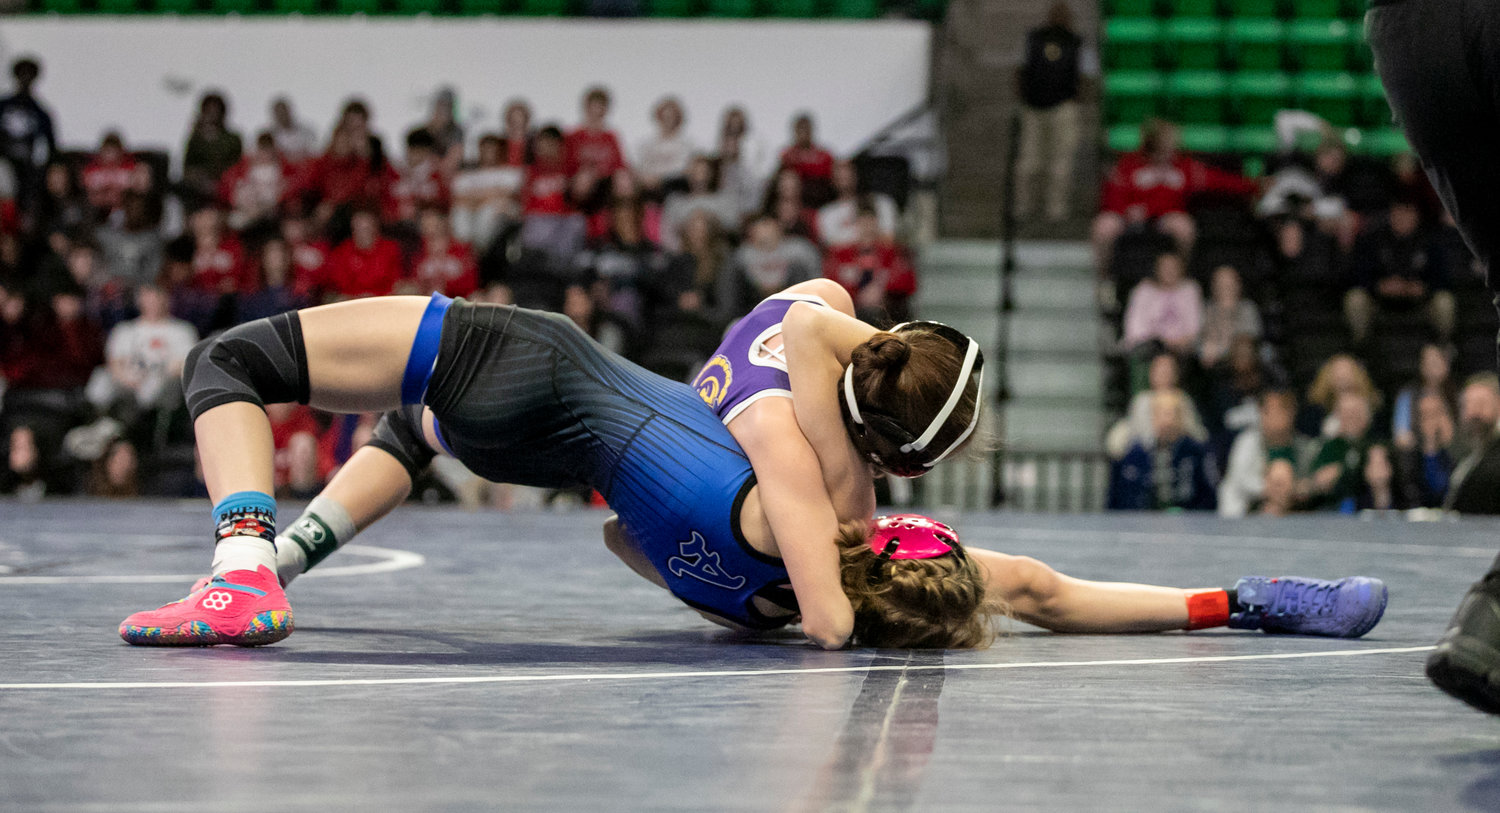 Lady Trojan Alanah Girard vies for a pin of Auburn’s Erin Clarkson during Friday’s state finals at Bill Harris Arena in Birmingham. After finishing as an individual runner-up last year, Girard returned home with a gold medal.